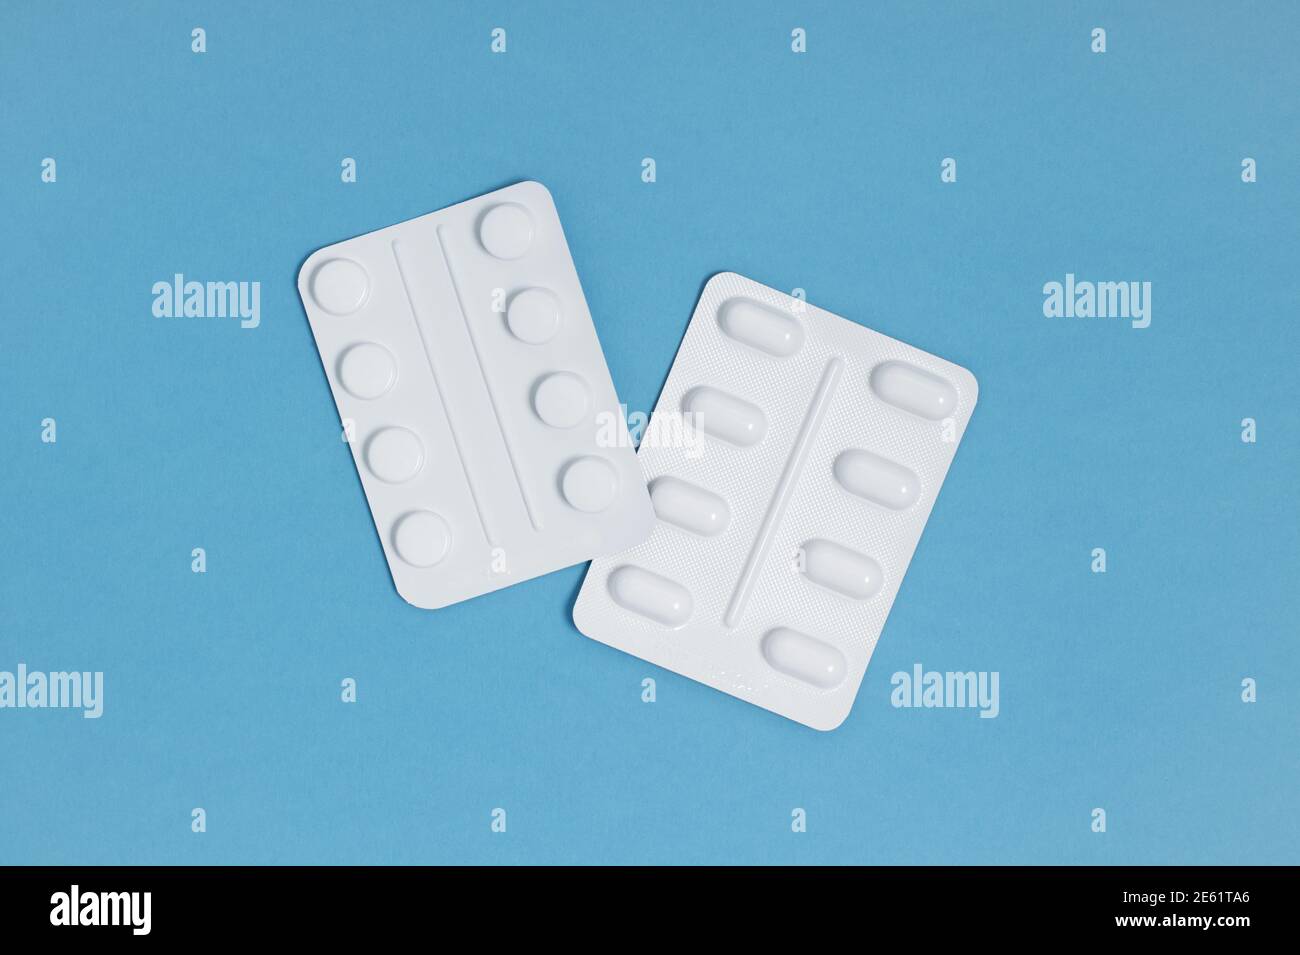 Two blister packs of tablets isolated on a bright blue background, overhead view Stock Photo